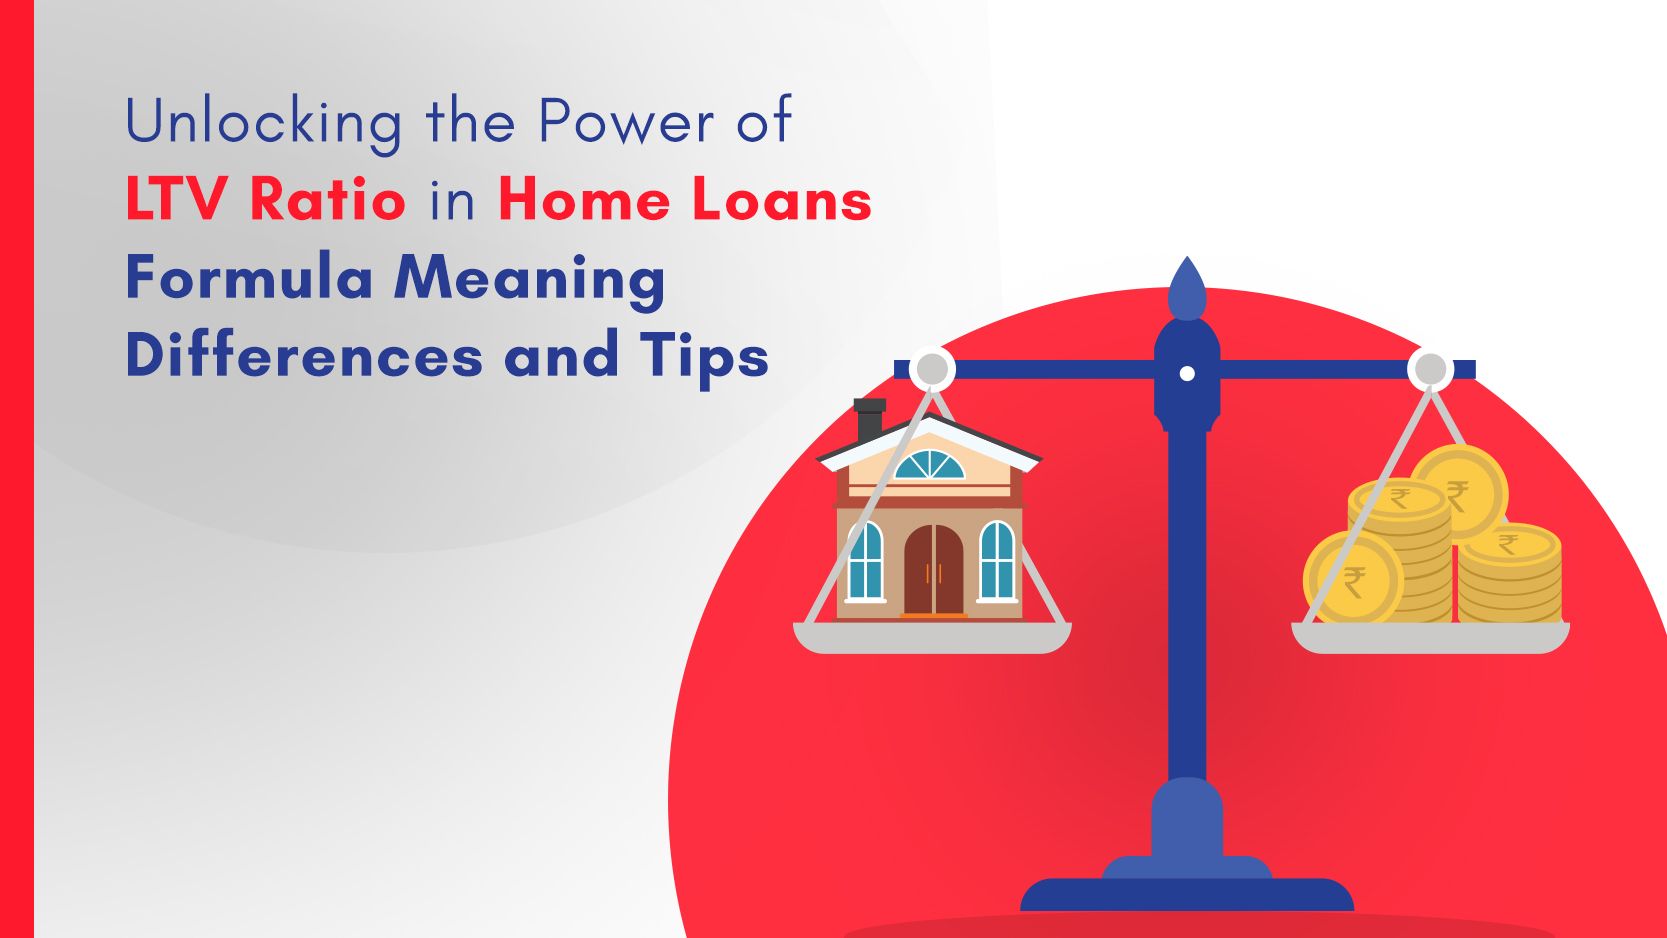 LTV Ratio in Home Loans - Formula, Meaning, Differences and Tips